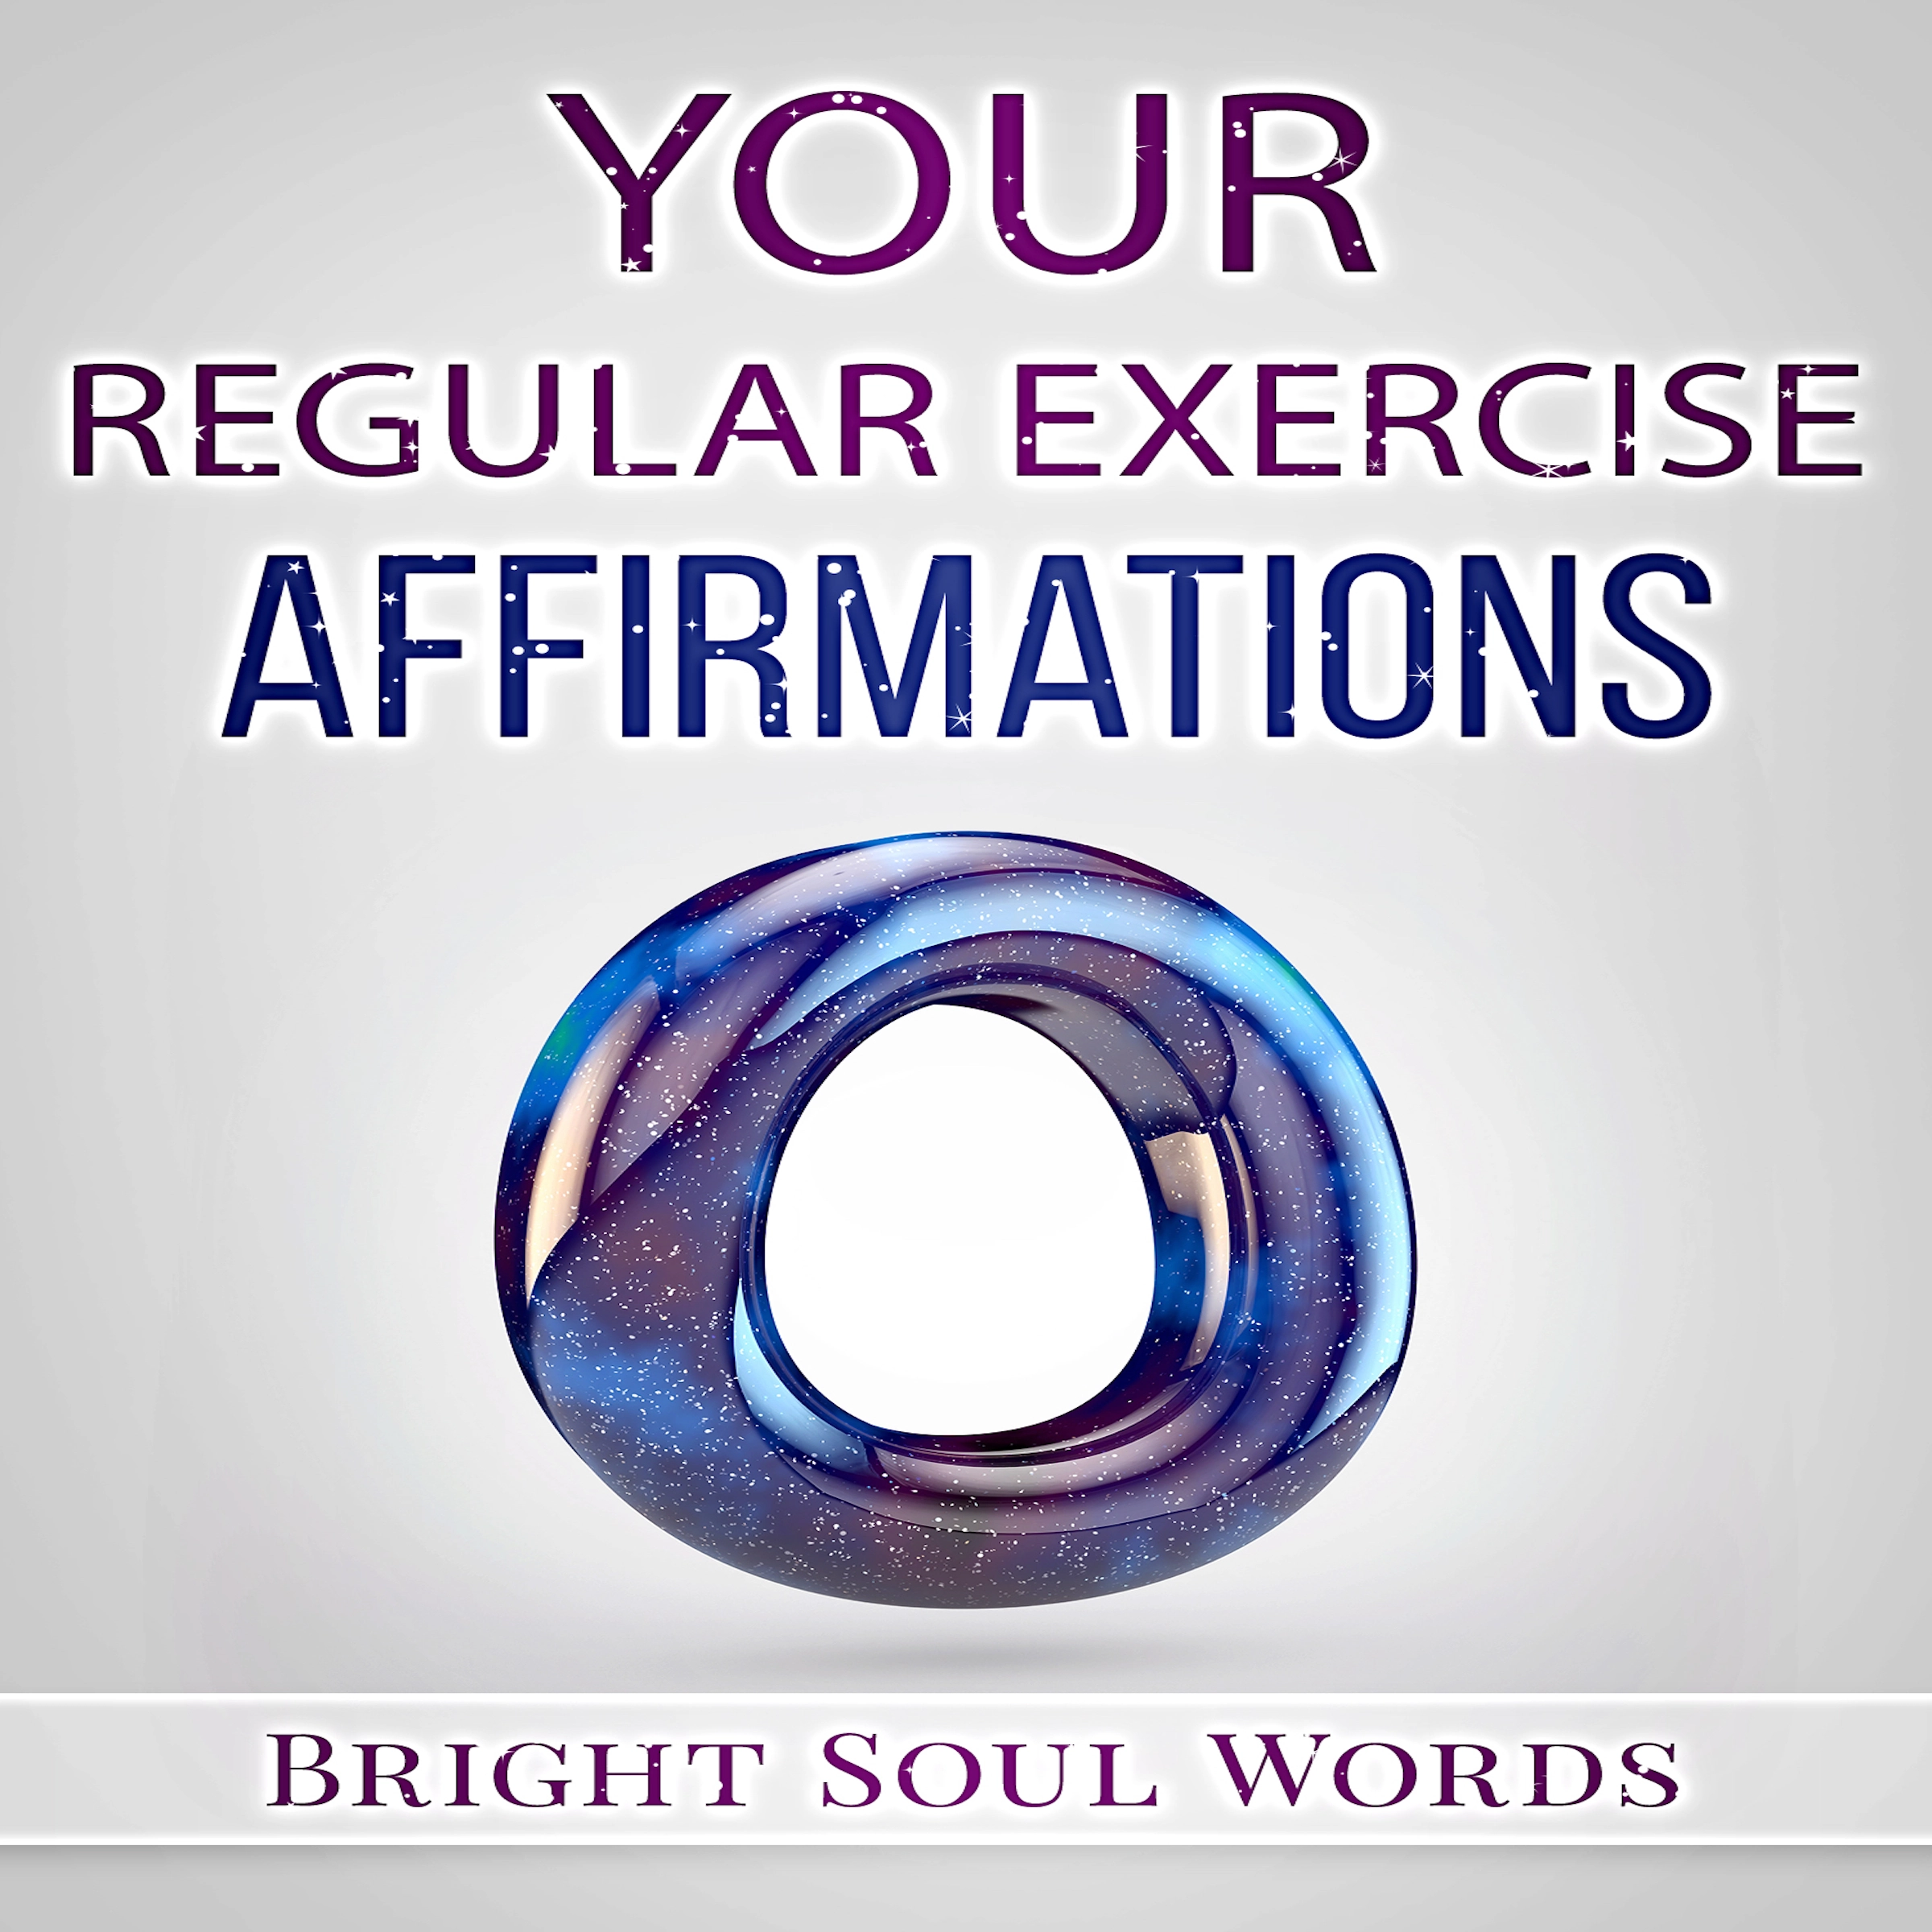 Your Regular Exercise Affirmations Audiobook by Bright Soul Words